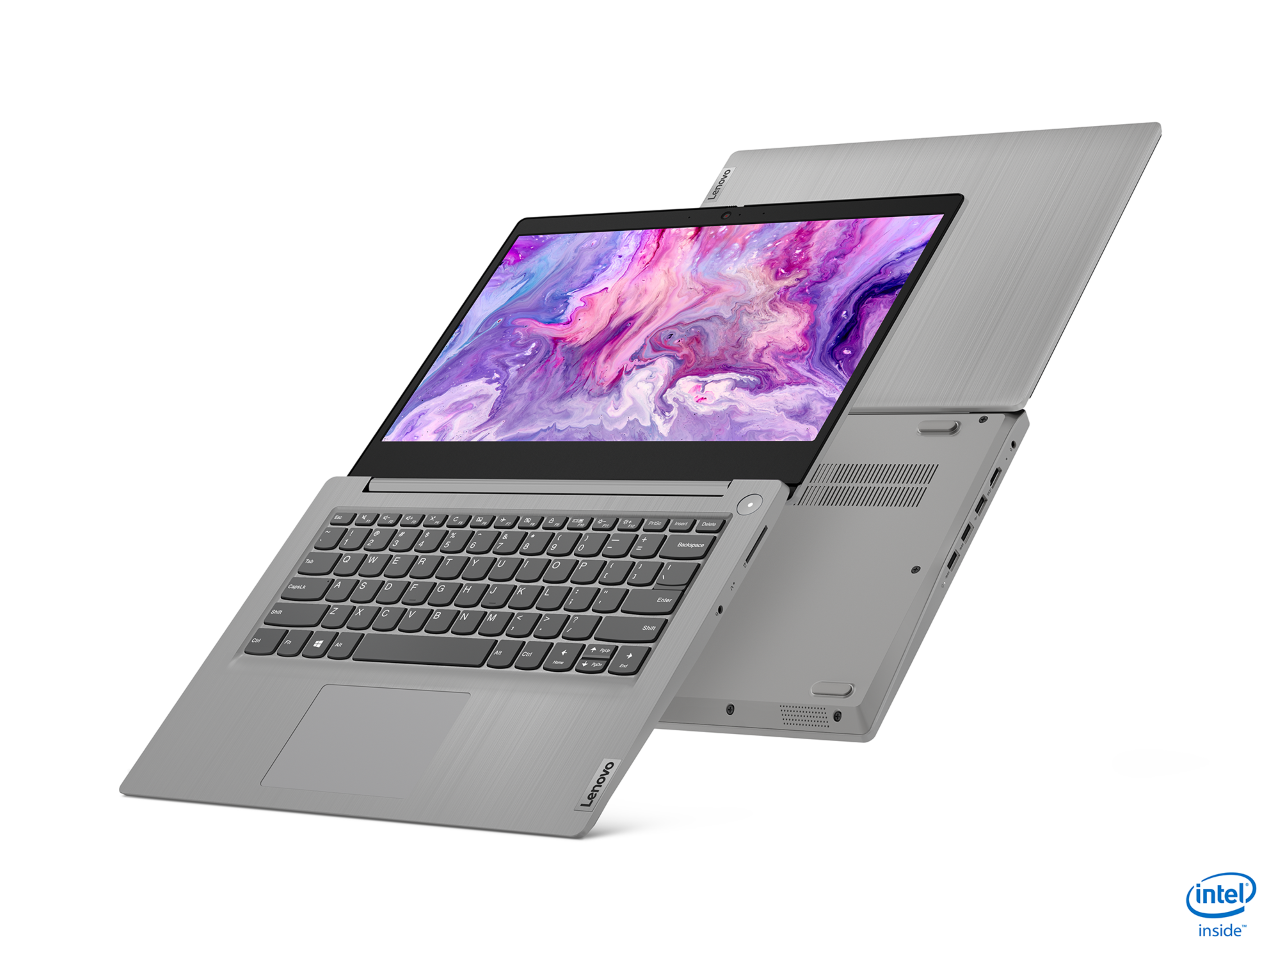 thumbnail_07_ideapad_3_14inch_imr_platinum_grey_non-backlit-kb_non_fpr_intel_hero_front_tilted.png